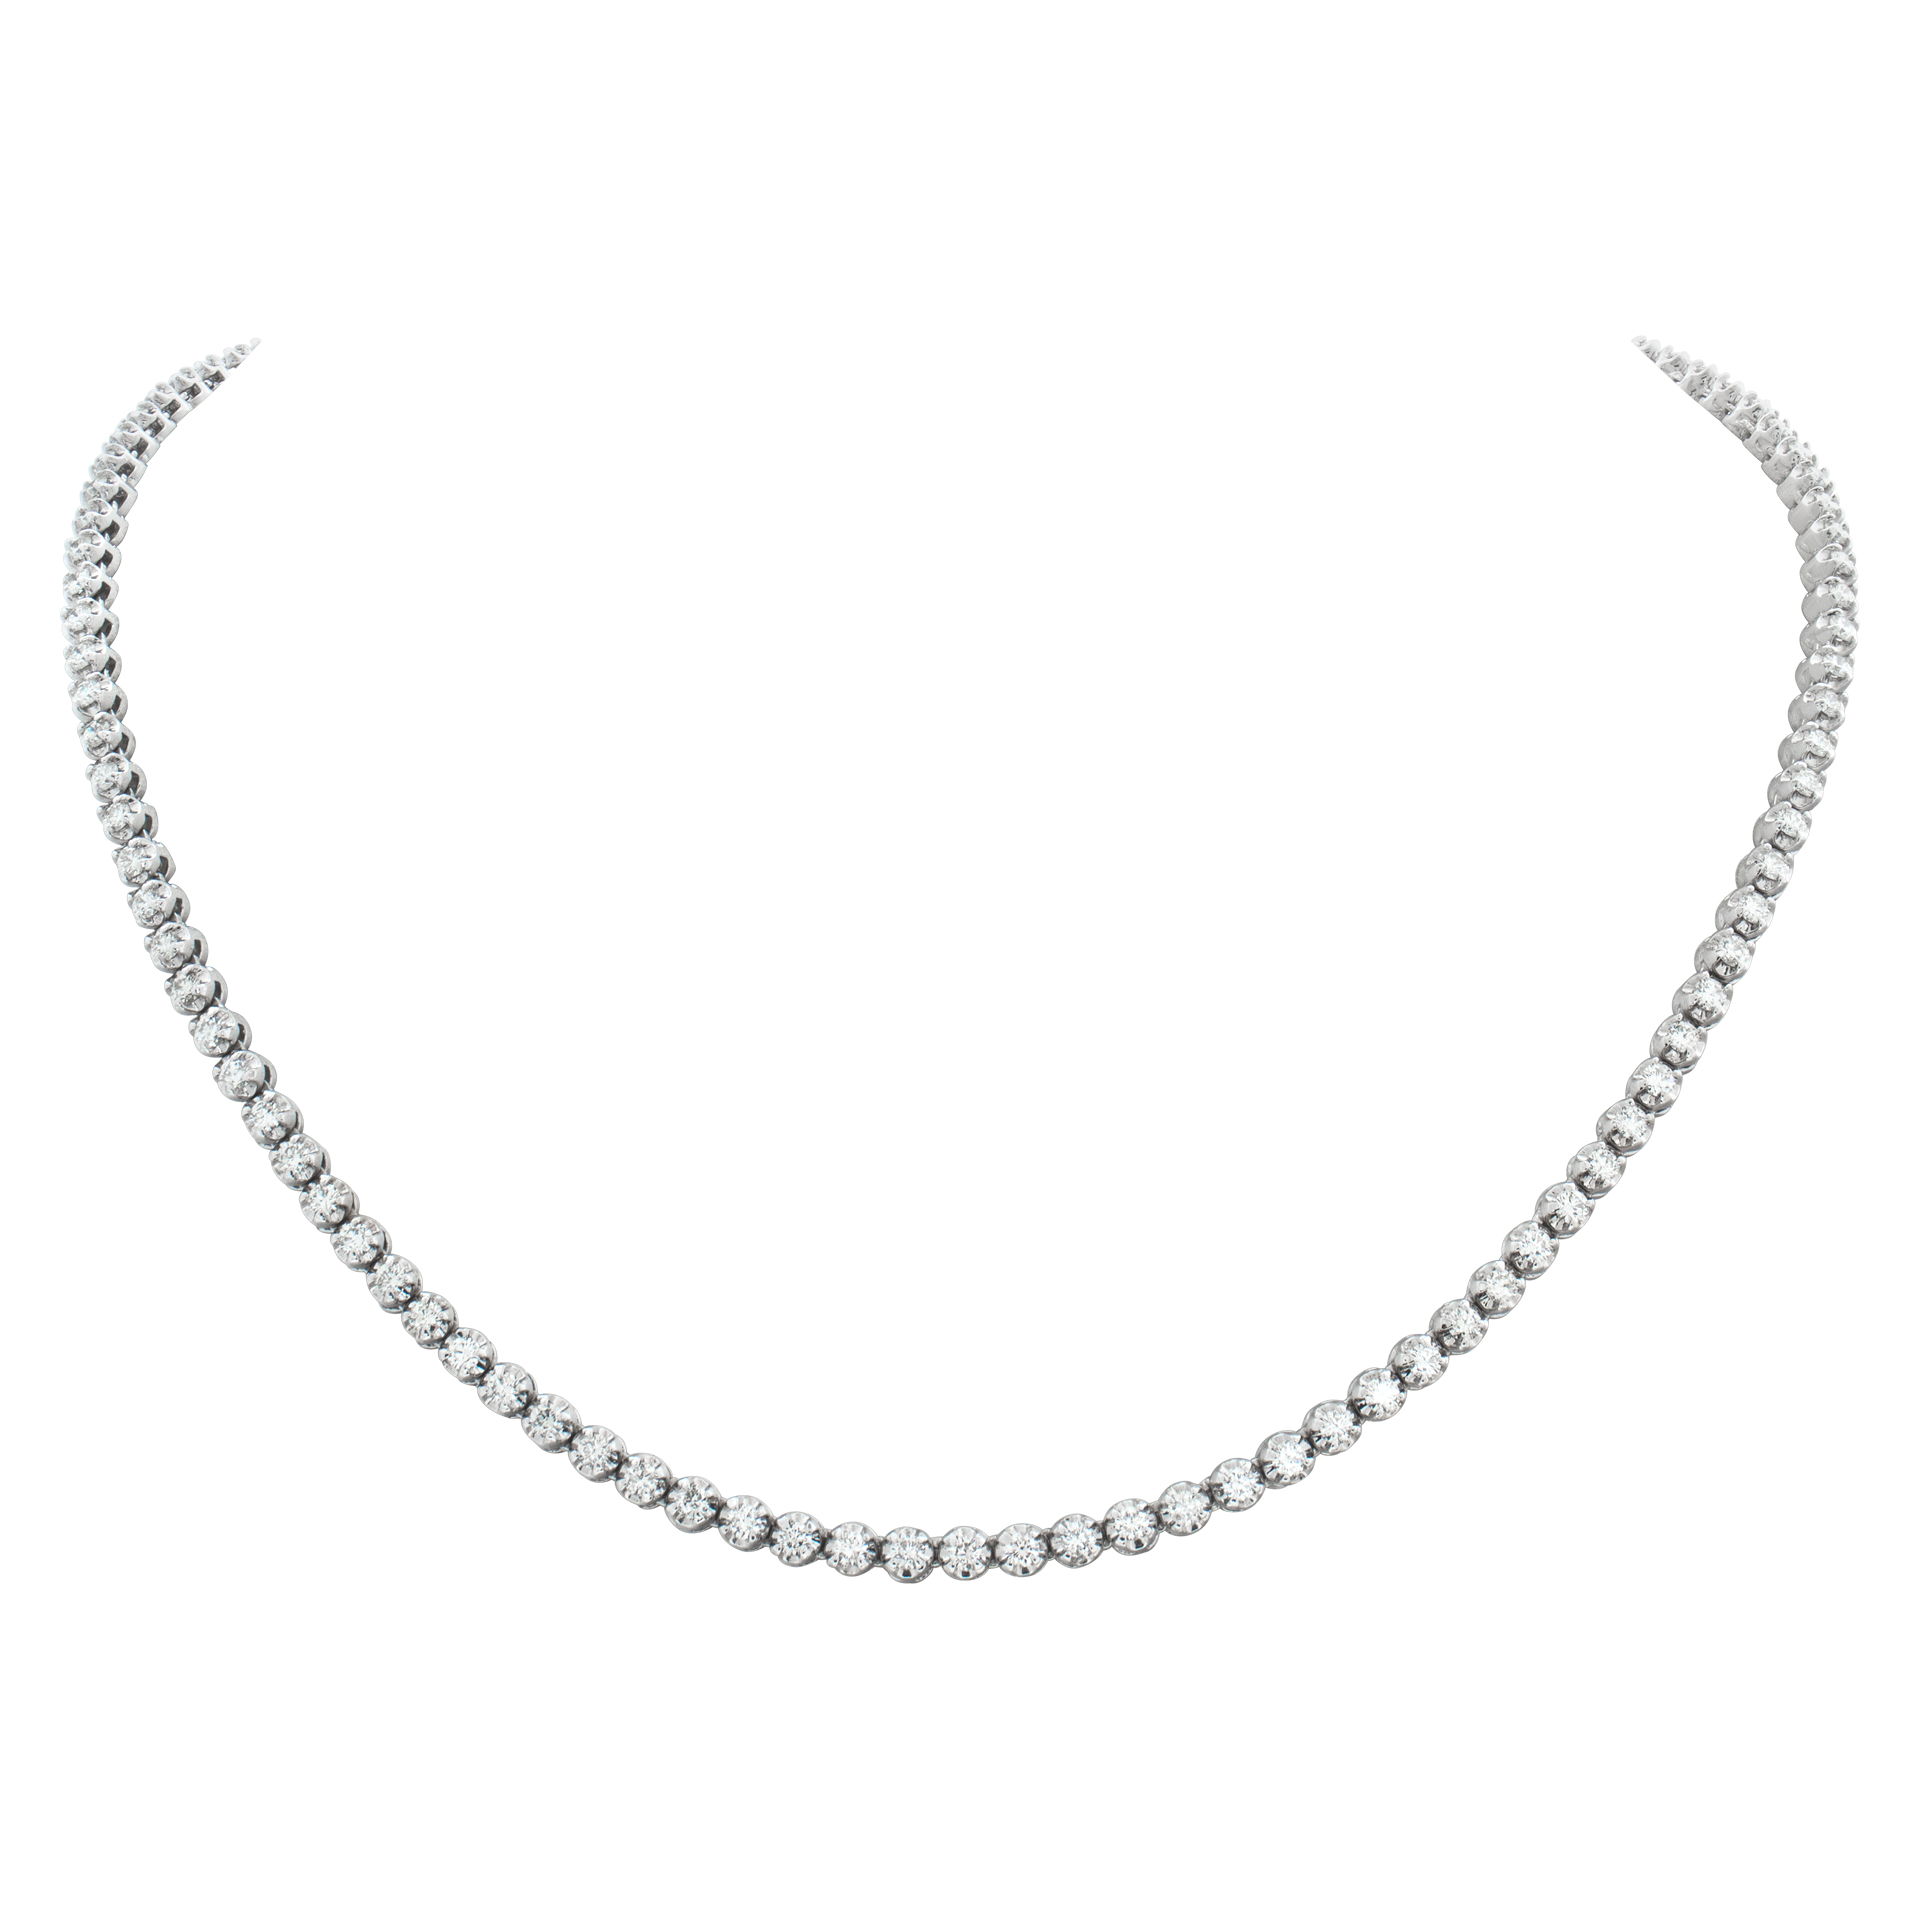 14k white gold line necklace with approximately 4 carats in diamonds